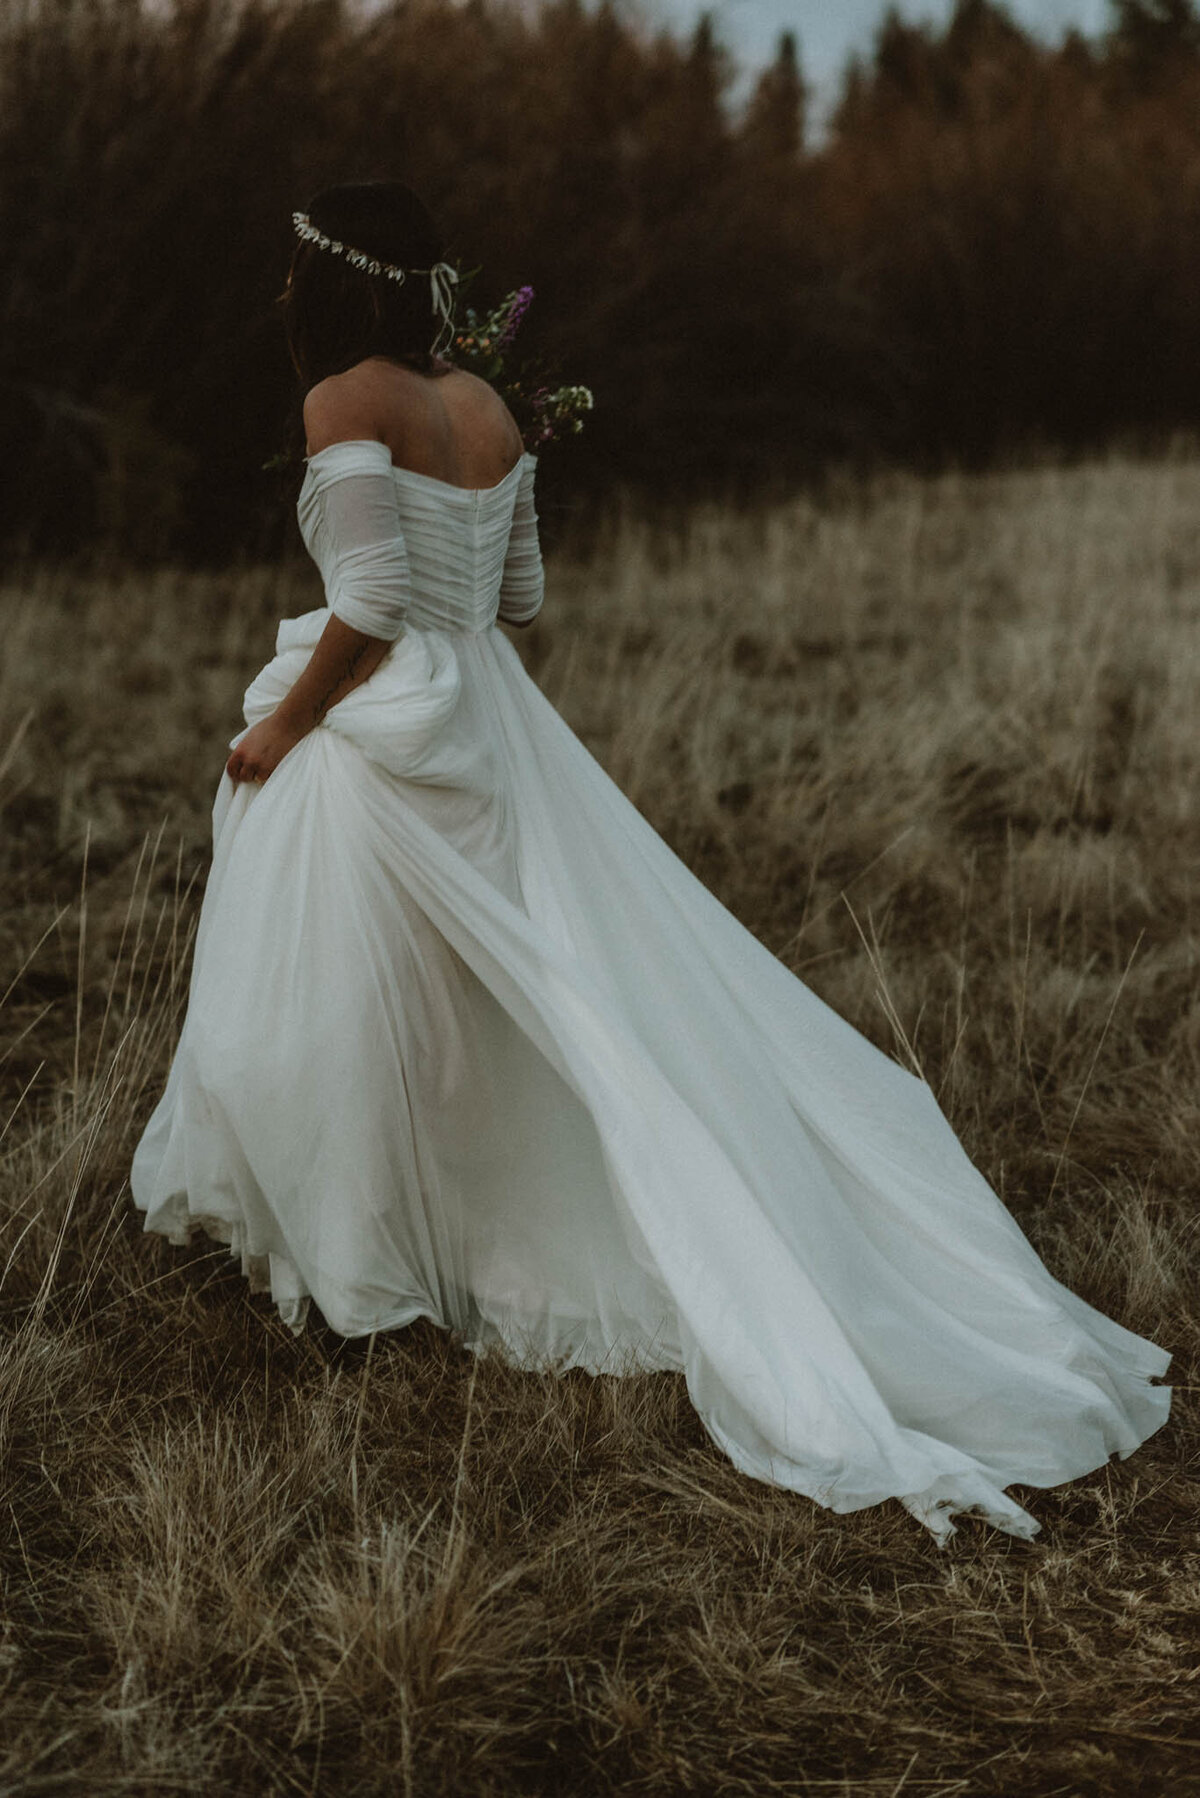 meredith_j_photography_elopement (8 of 8)